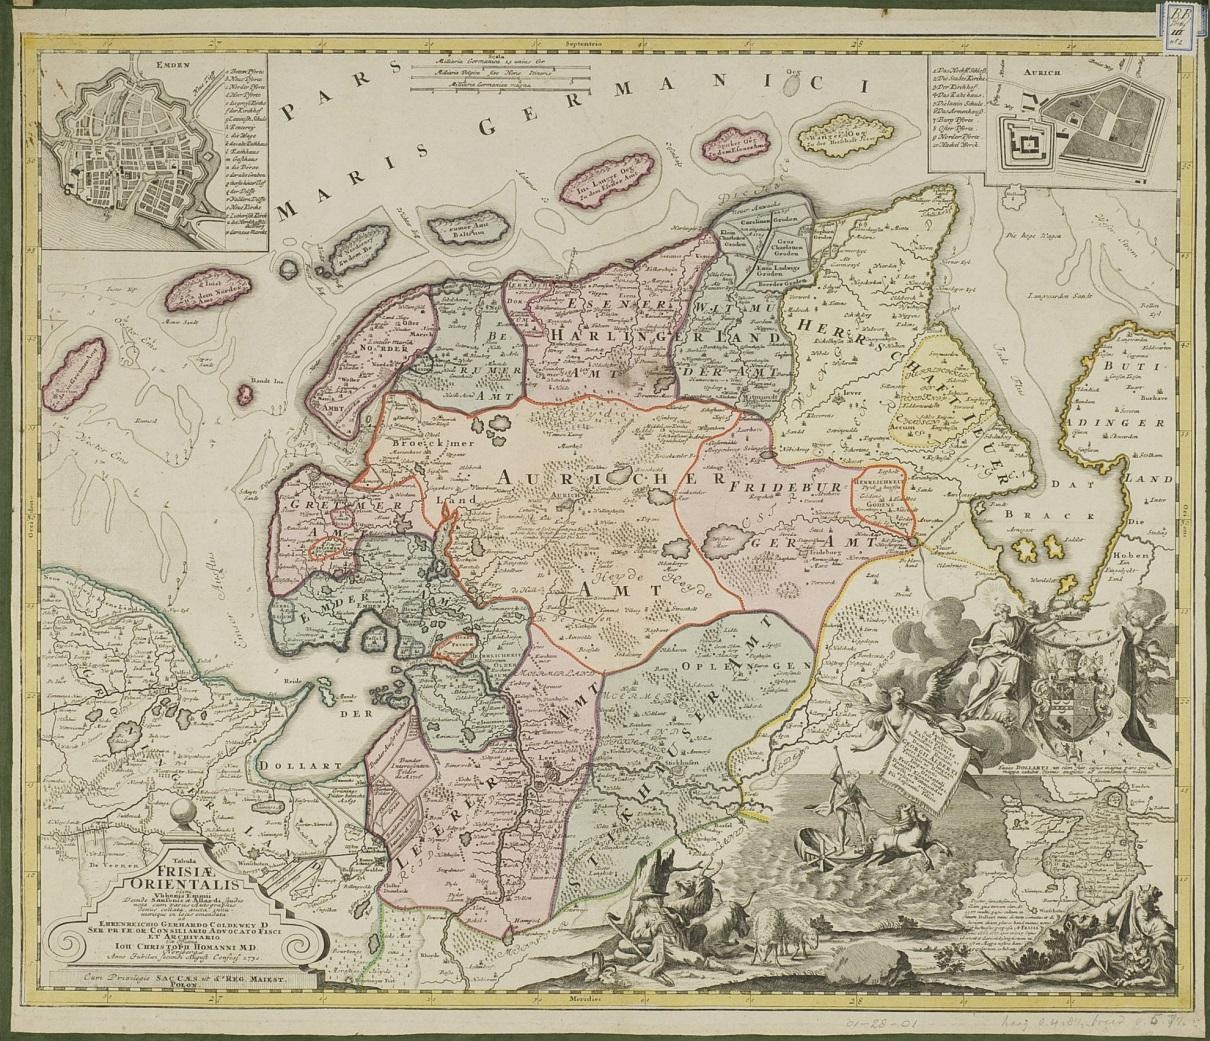 slide 7: Single map of Ostfriesland by Emmius, called Tabula Frisiæ Orientalis, published posthumously by Johannes Christopher Homann in Nuremberg in 1730. The mythical flood is still mentioned, and this time illustrated with yet more artwork than in earlier maps.